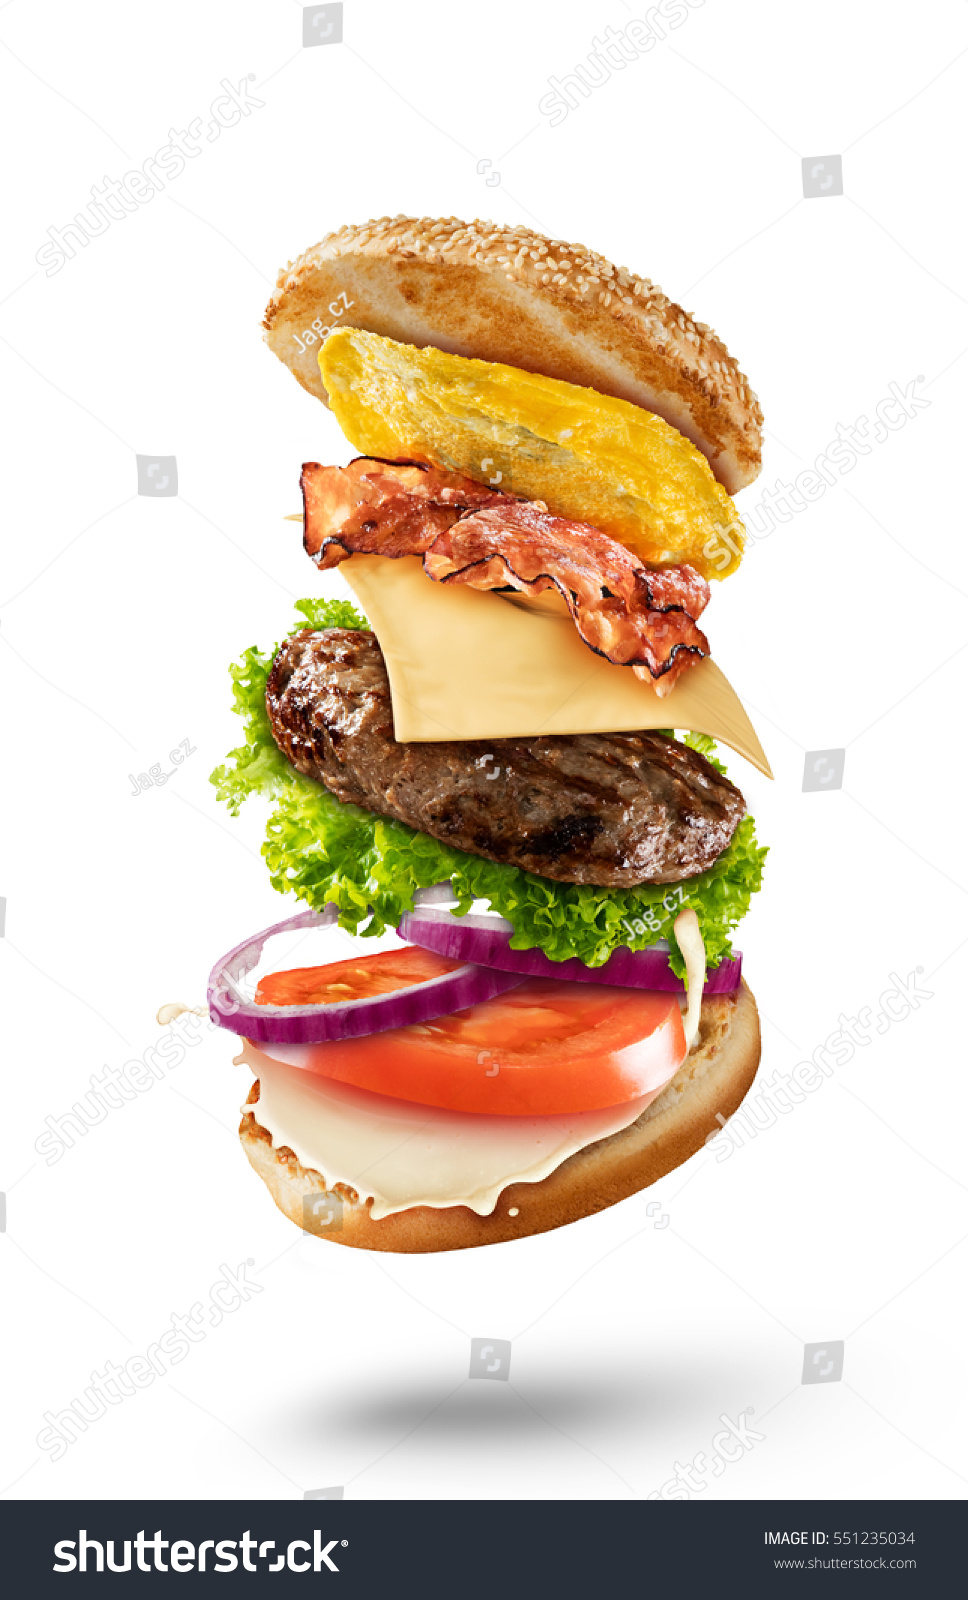 Maxi hamburger with flying ingredients isolated on white background. High resolution image #551235034